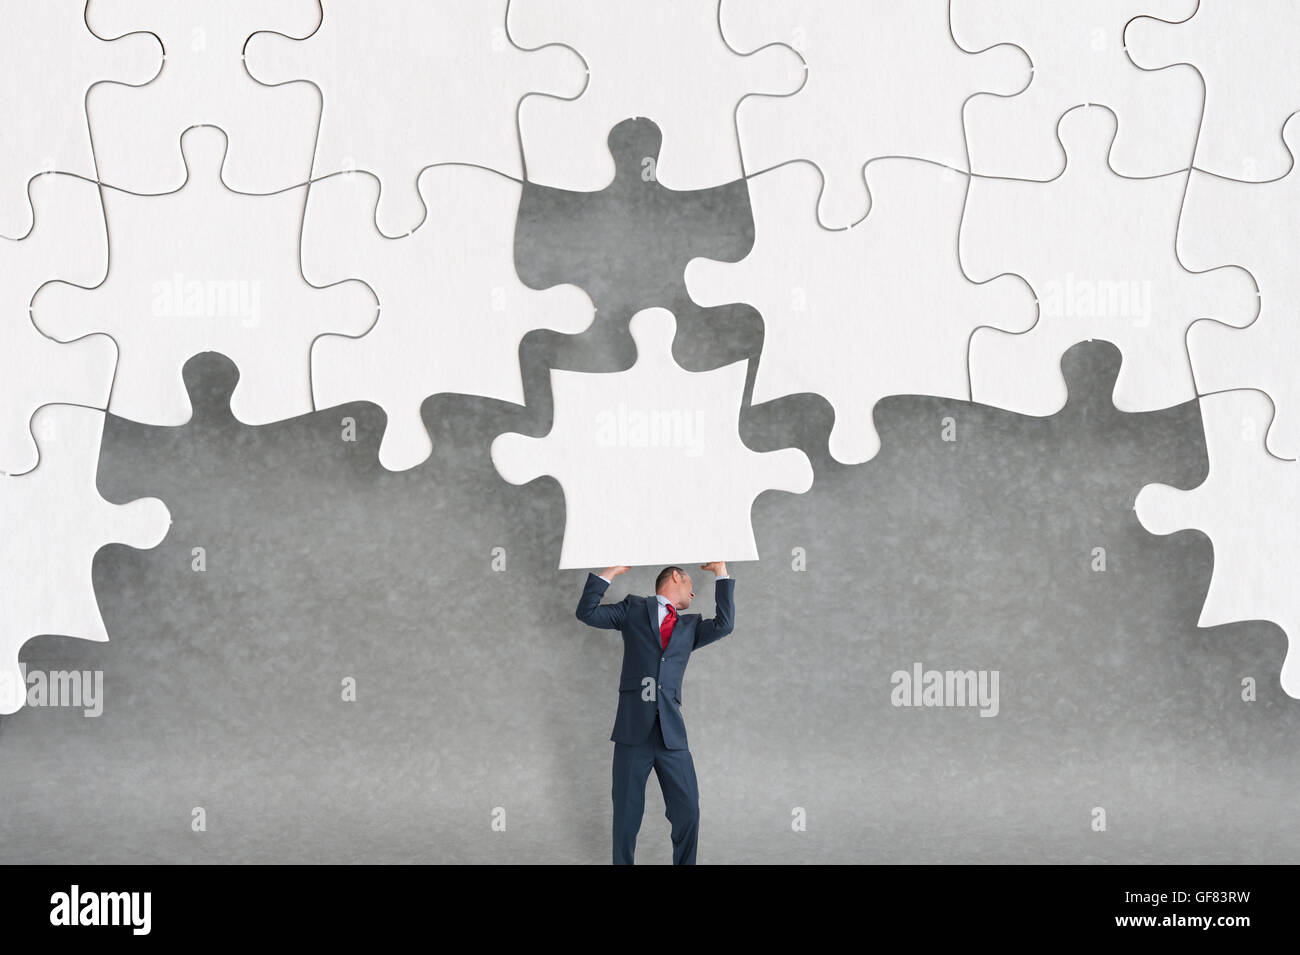 business challenge concept businessman completing a jigsaw puzzle Stock Photo